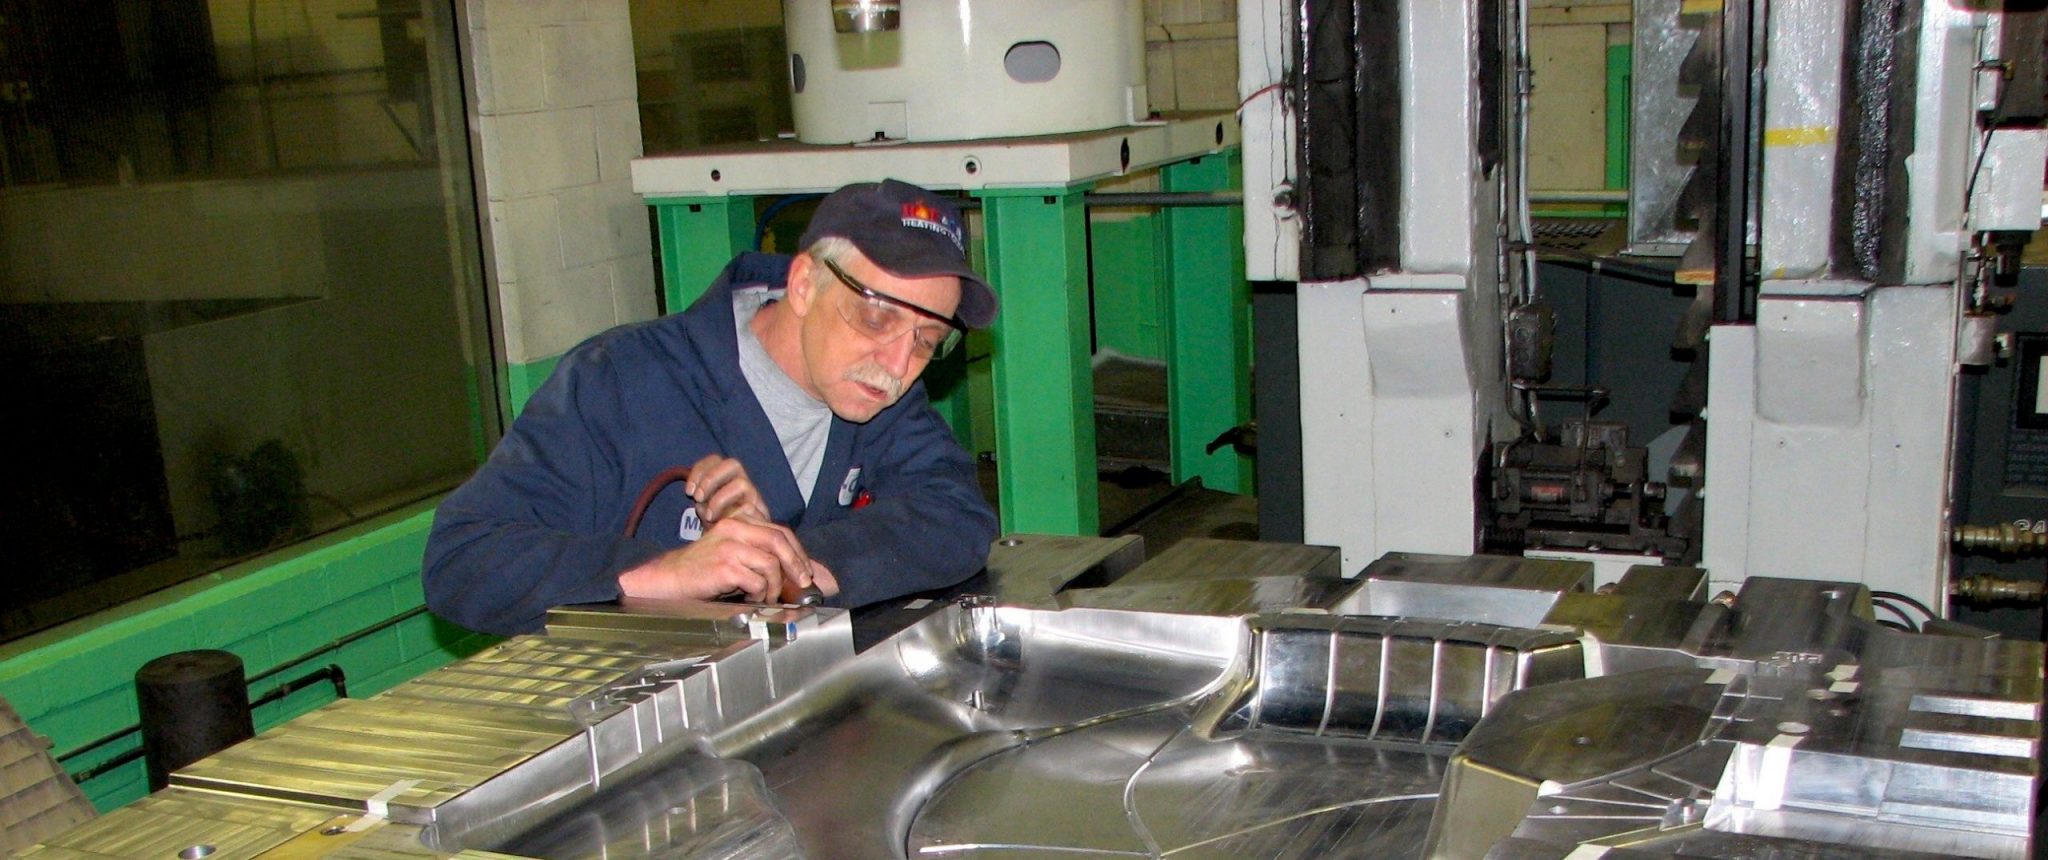 A technician working on an injection mold